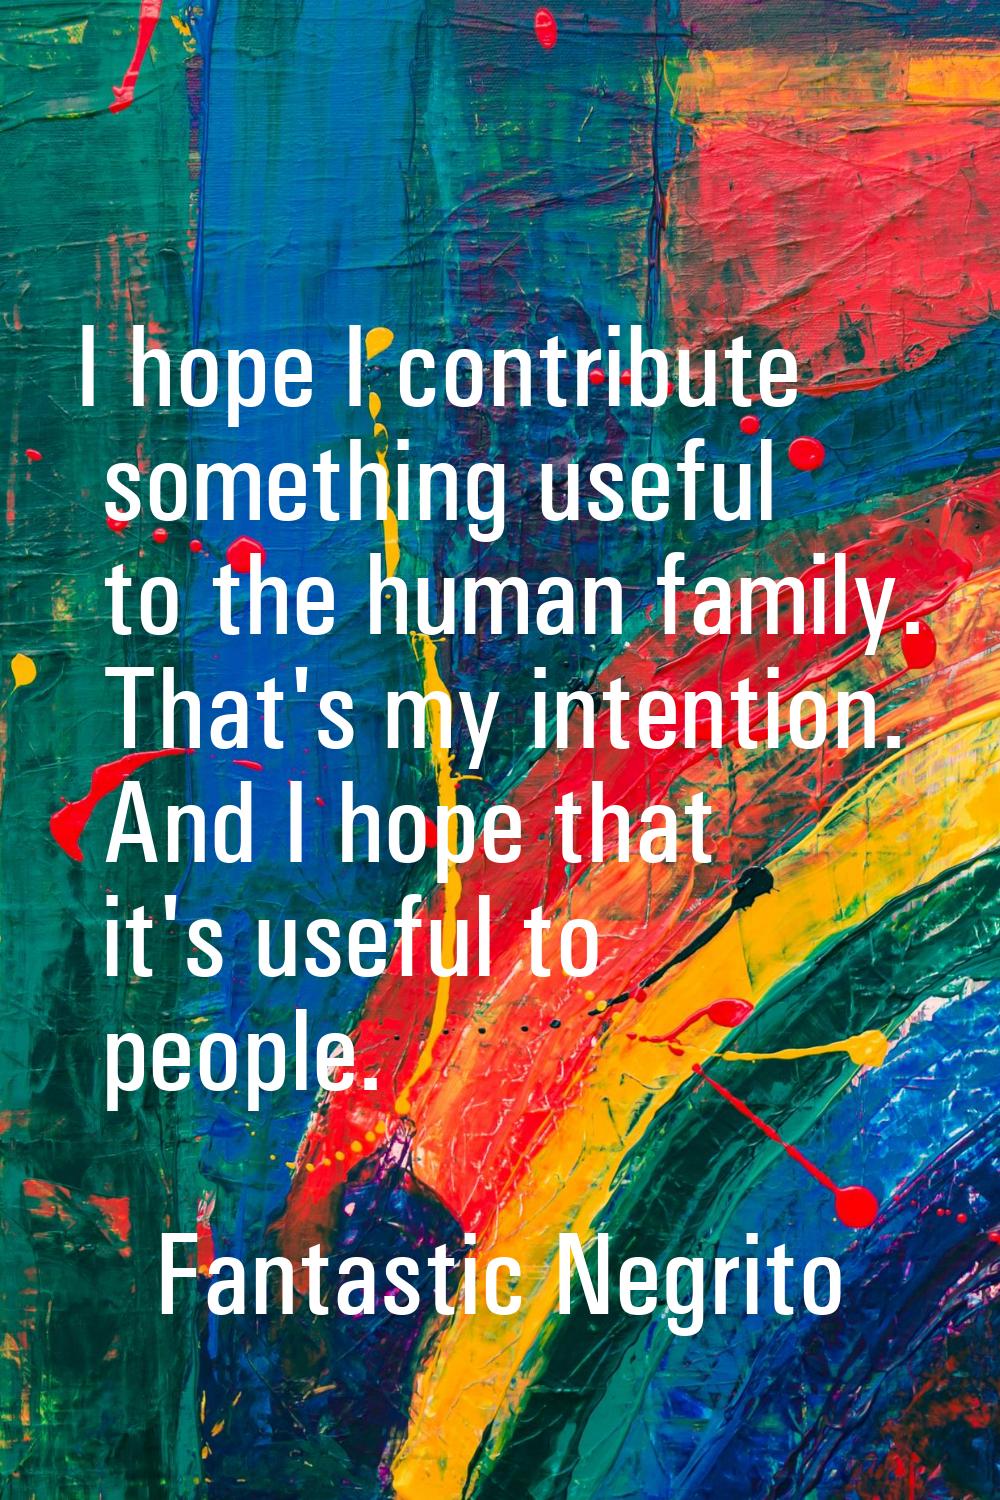 I hope I contribute something useful to the human family. That's my intention. And I hope that it's